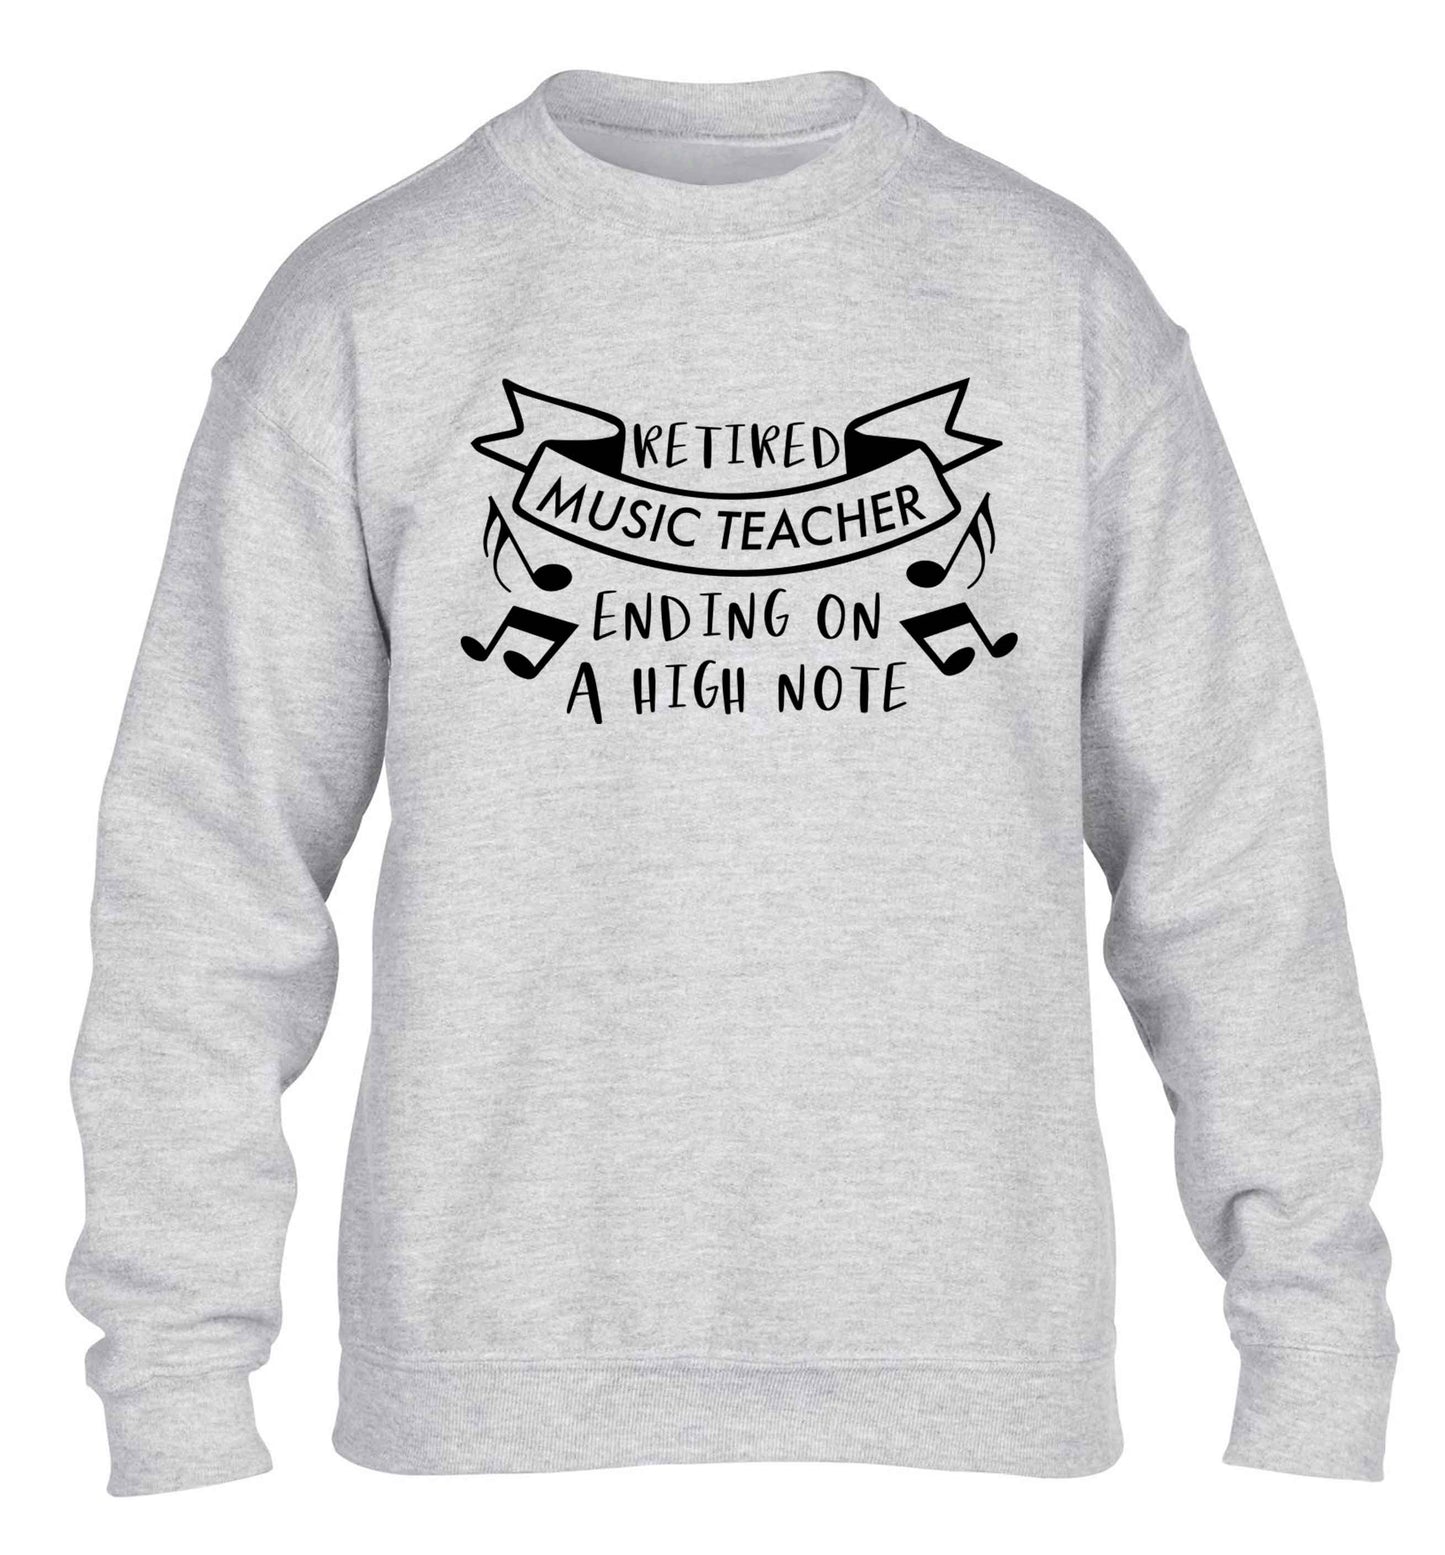 Retired music teacher ending on a high note children's grey sweater 12-13 Years